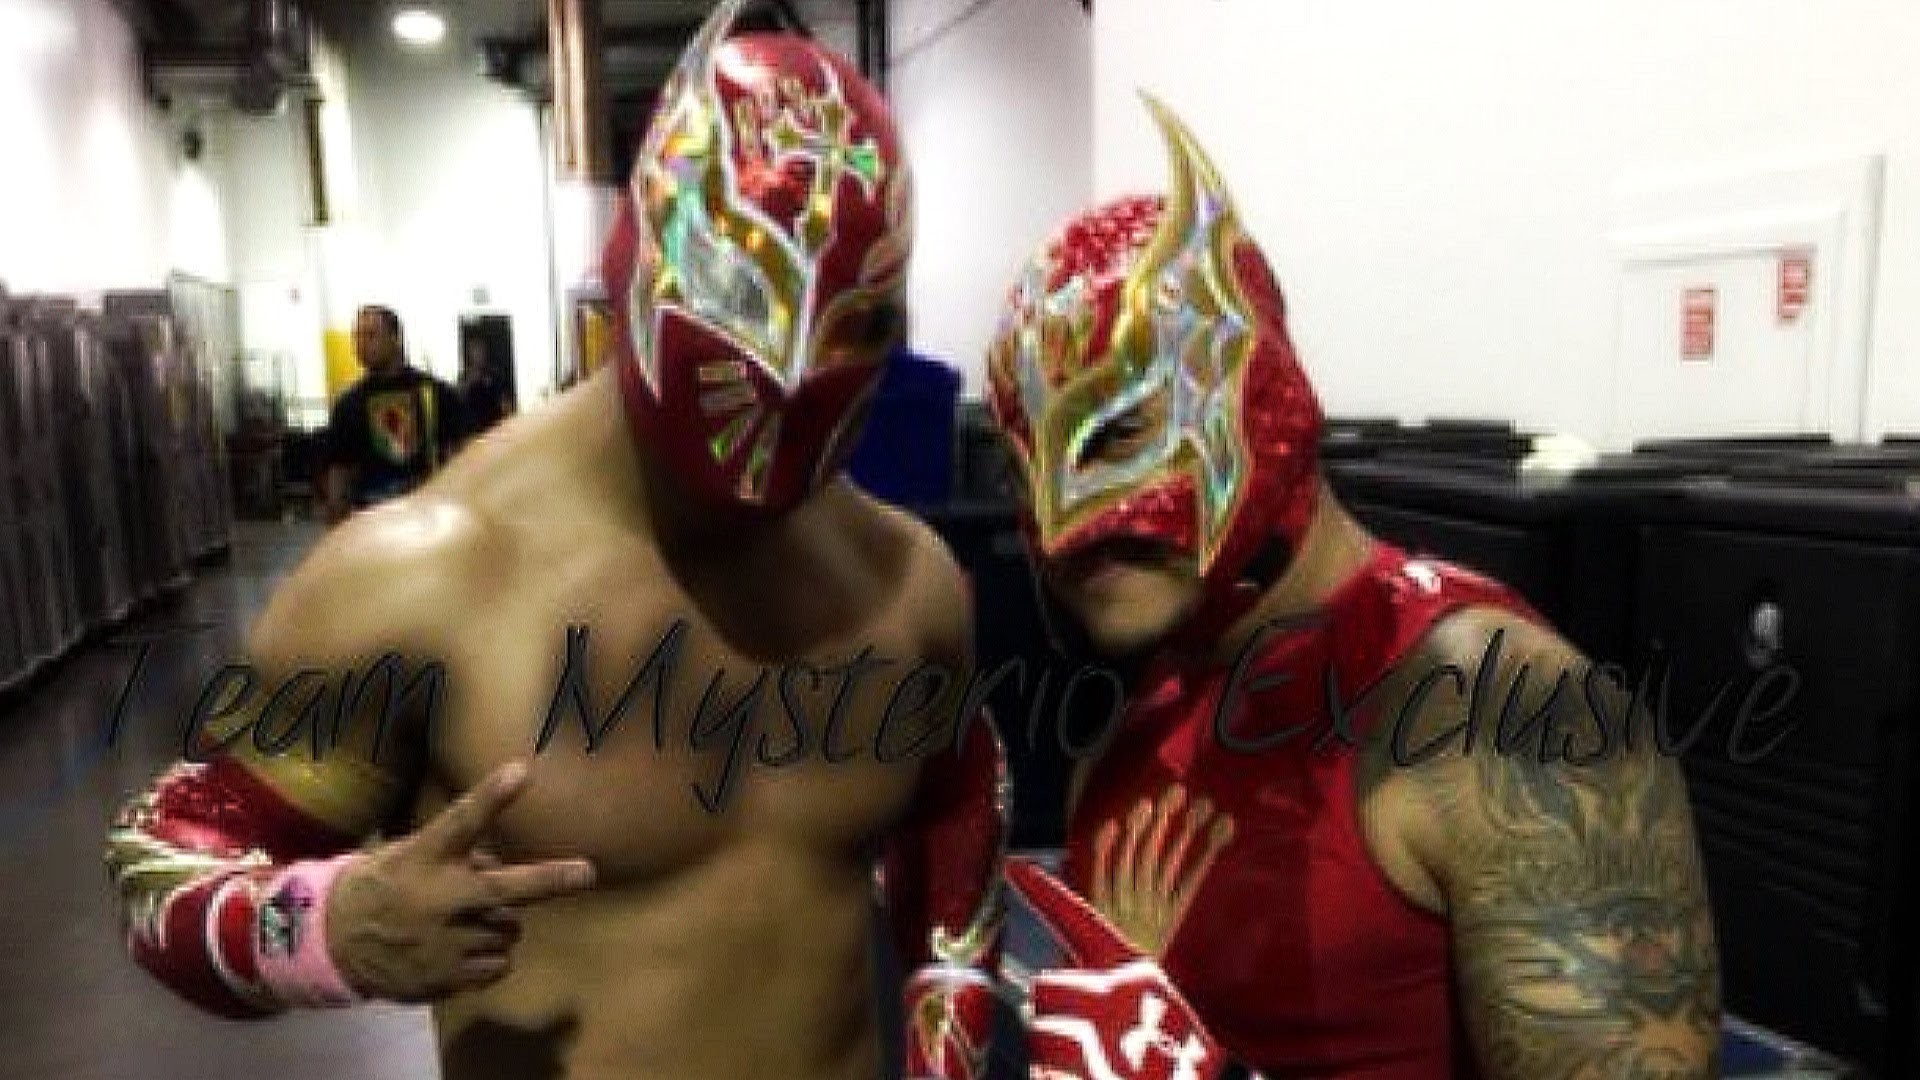 1920x1080 Pics Photos - Viewing Gallery For Wwe Rey Mysterio And Sin .